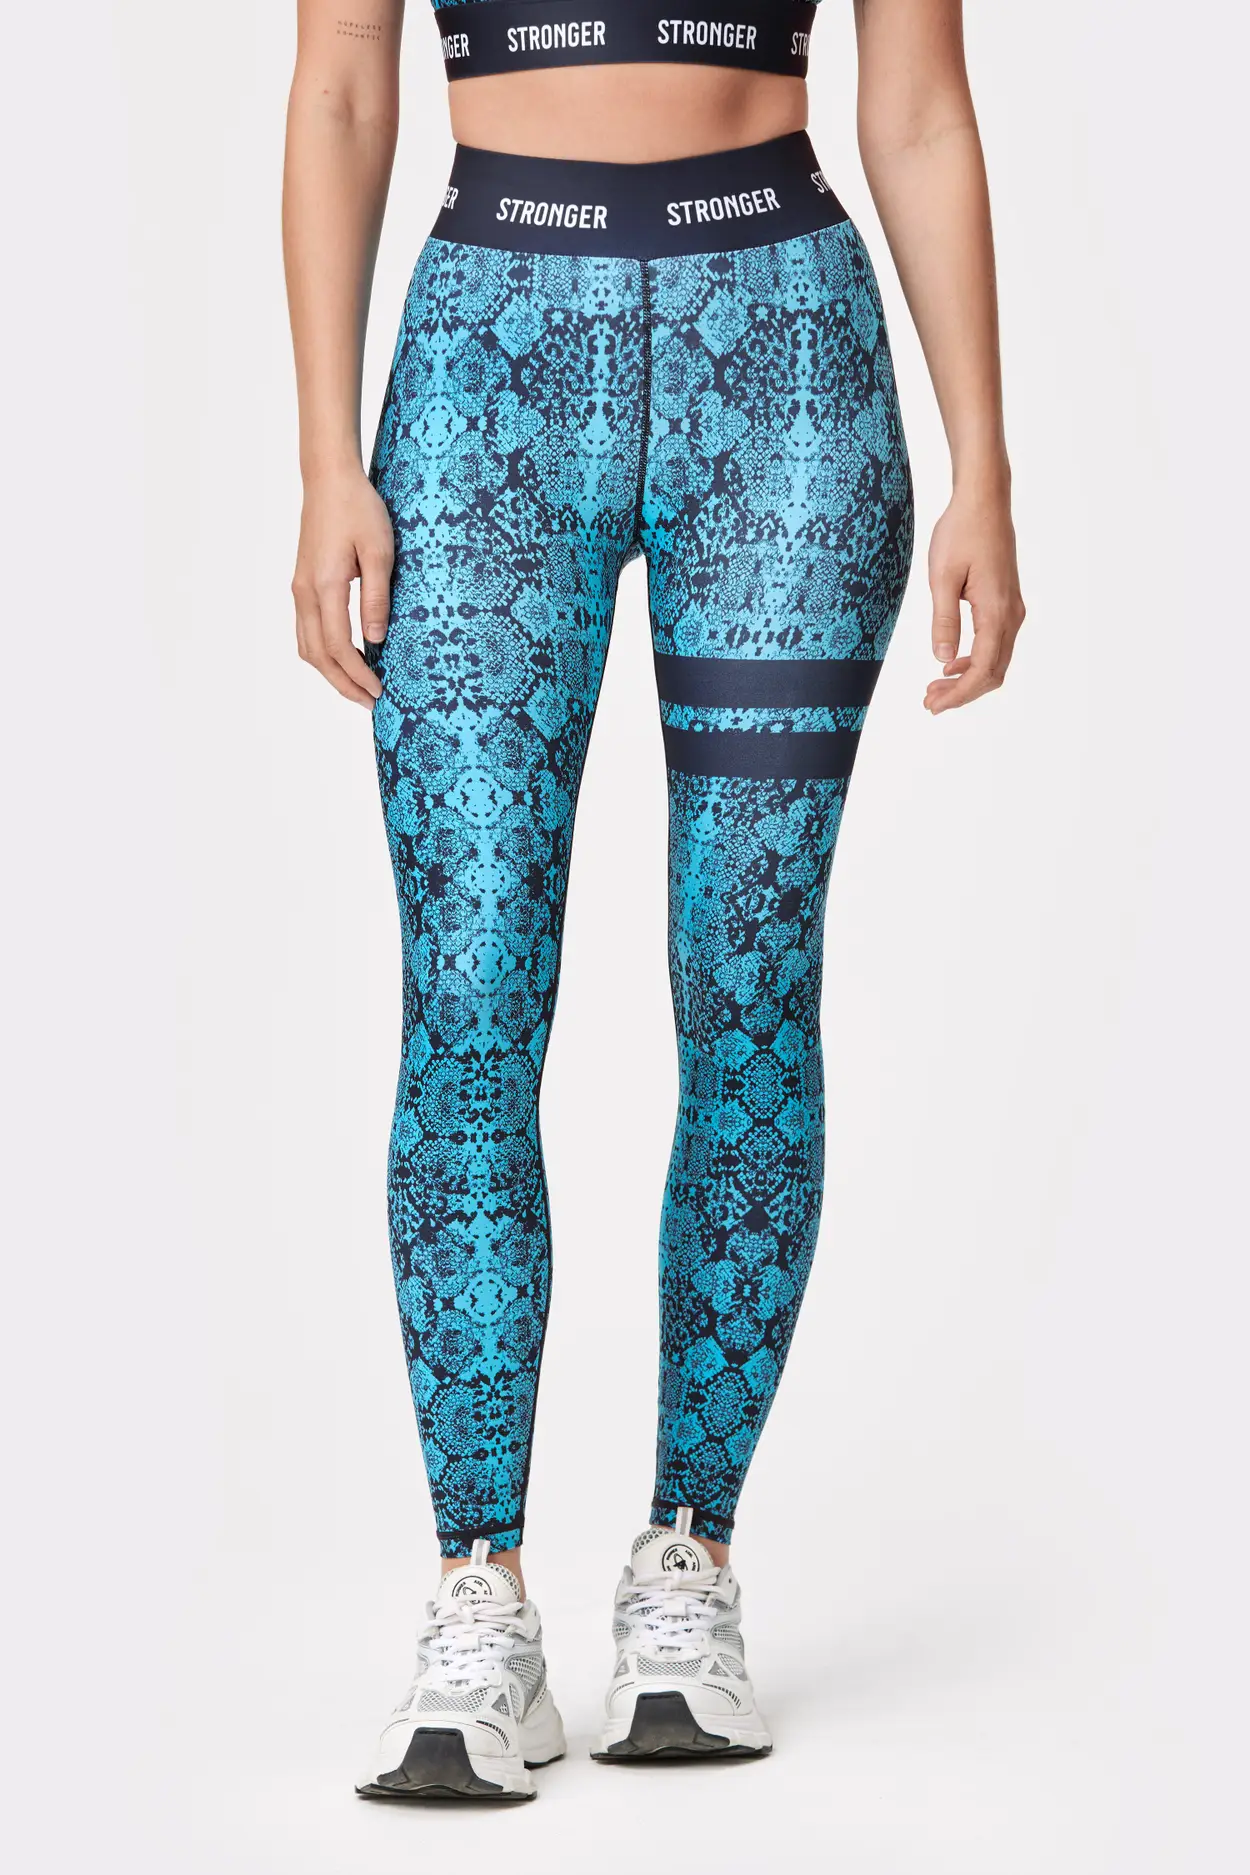 Stronger Leggings – Up to You Activewear